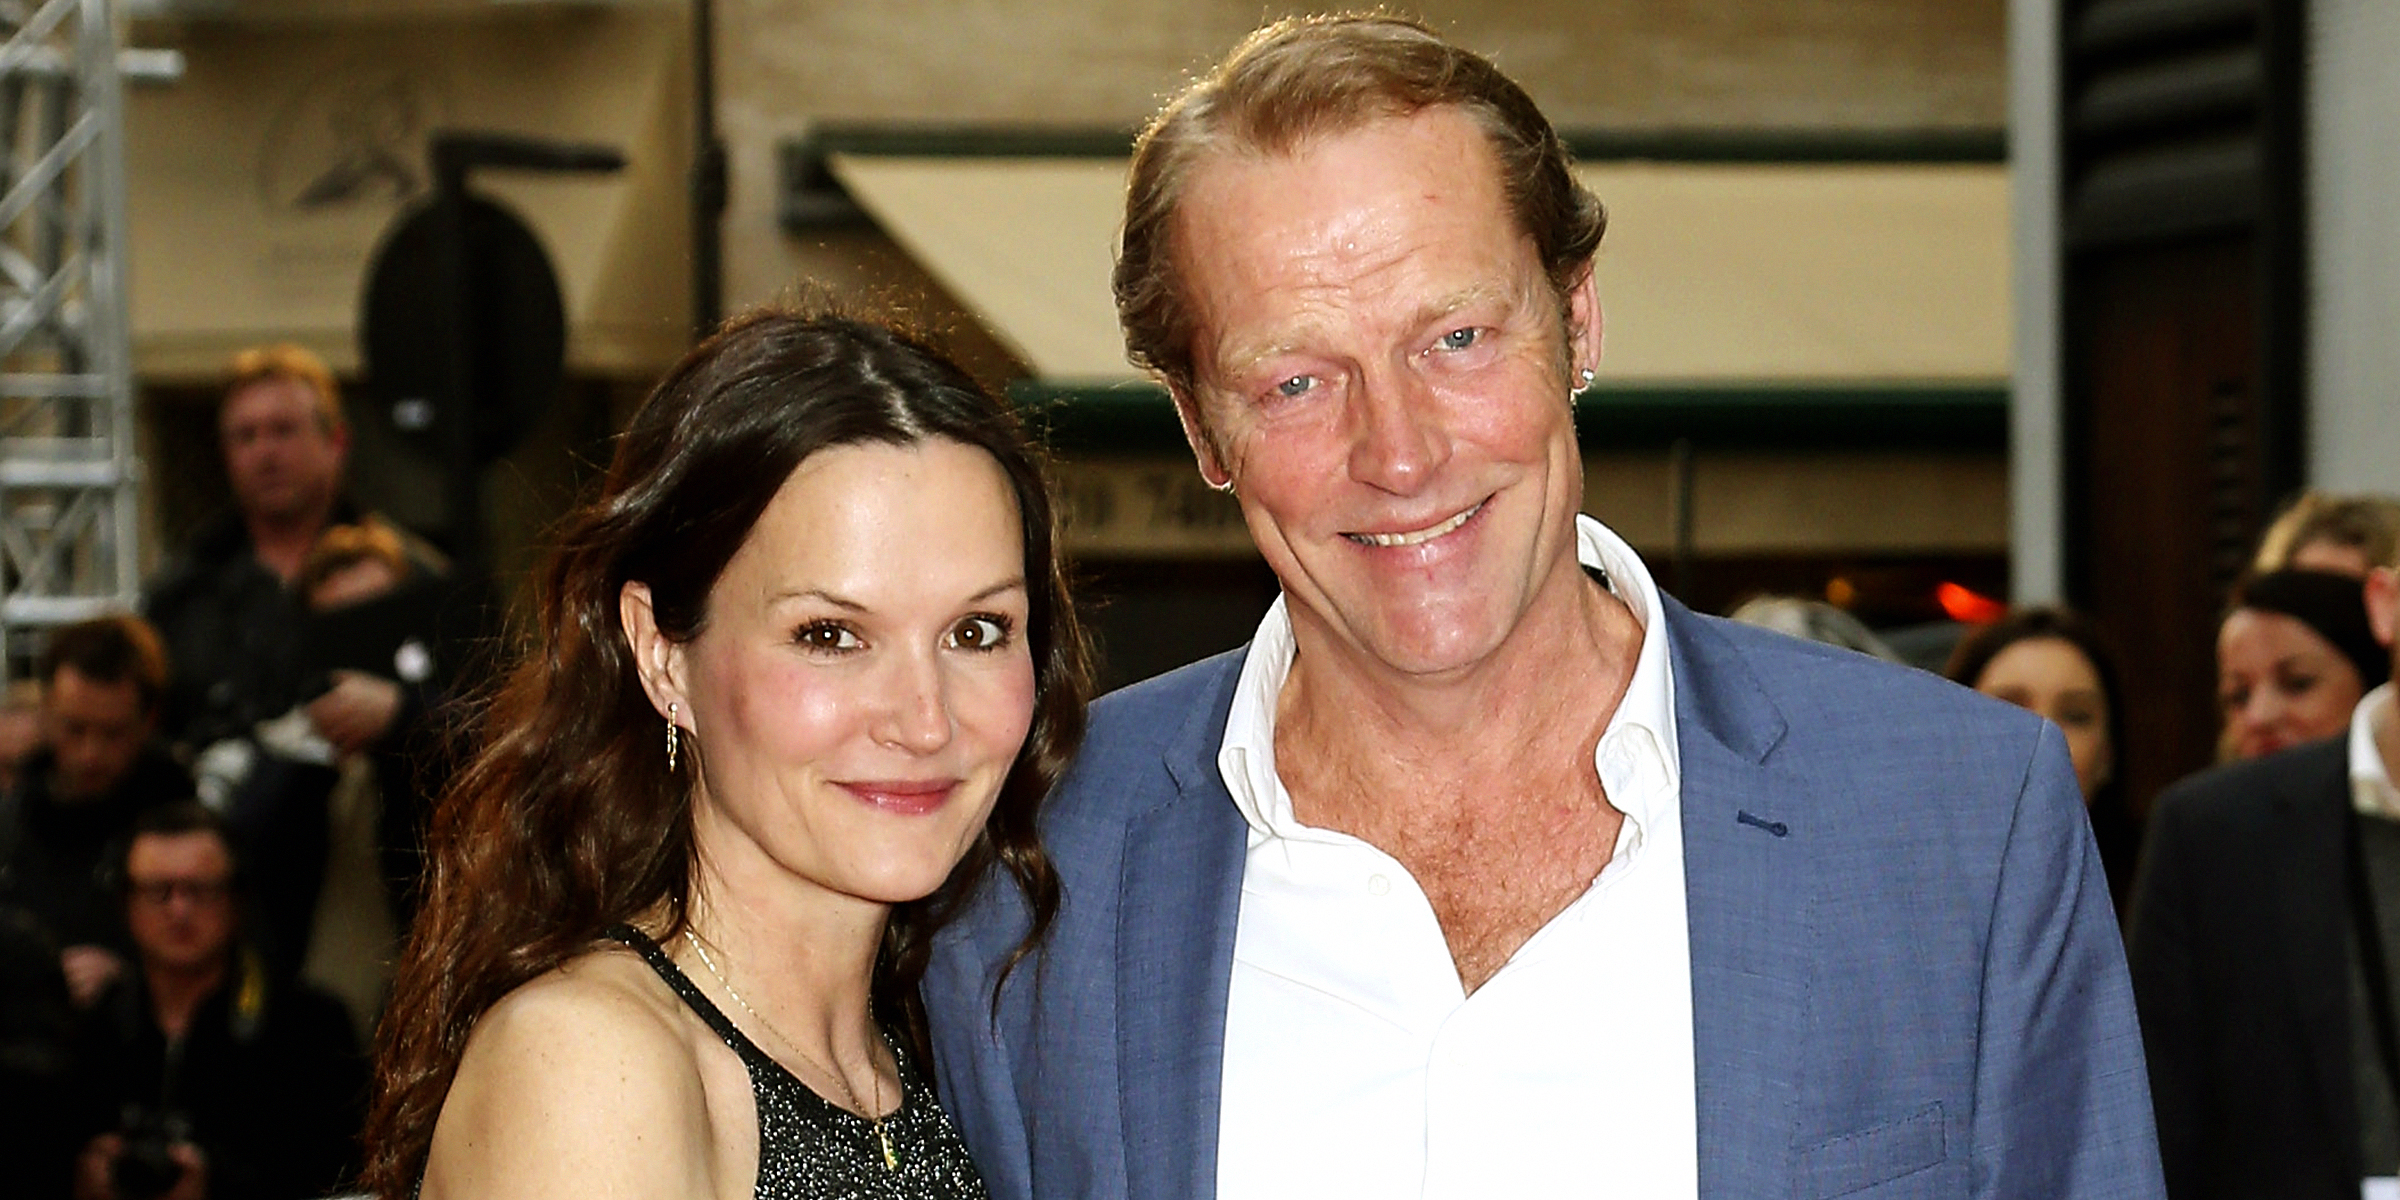 Iain Glen and Chalotte Emmerson | Source: Getty Images